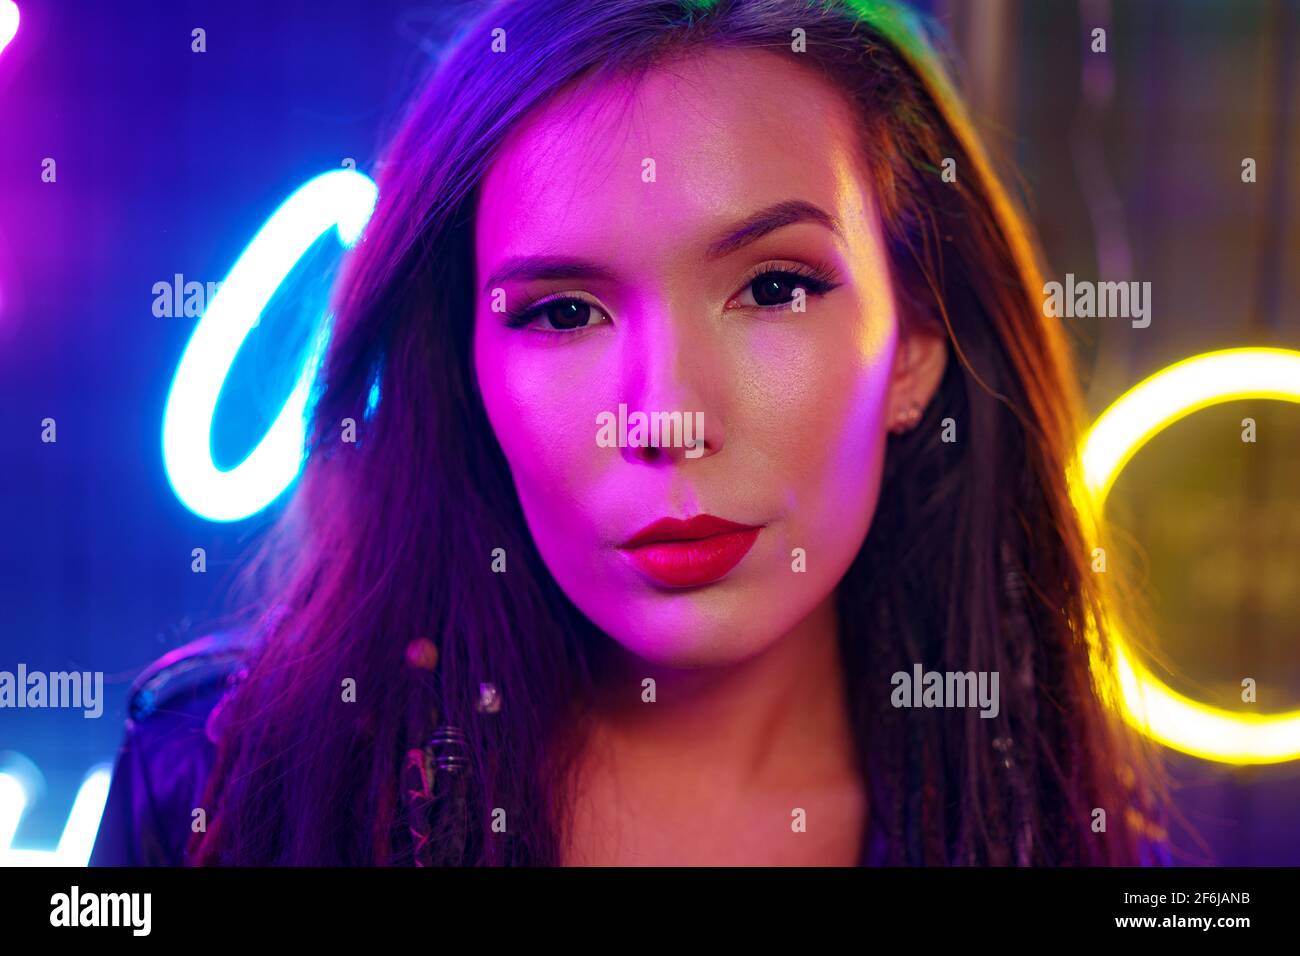 Portrait of a young attractive female standing near neon lamps at night Stock Photo